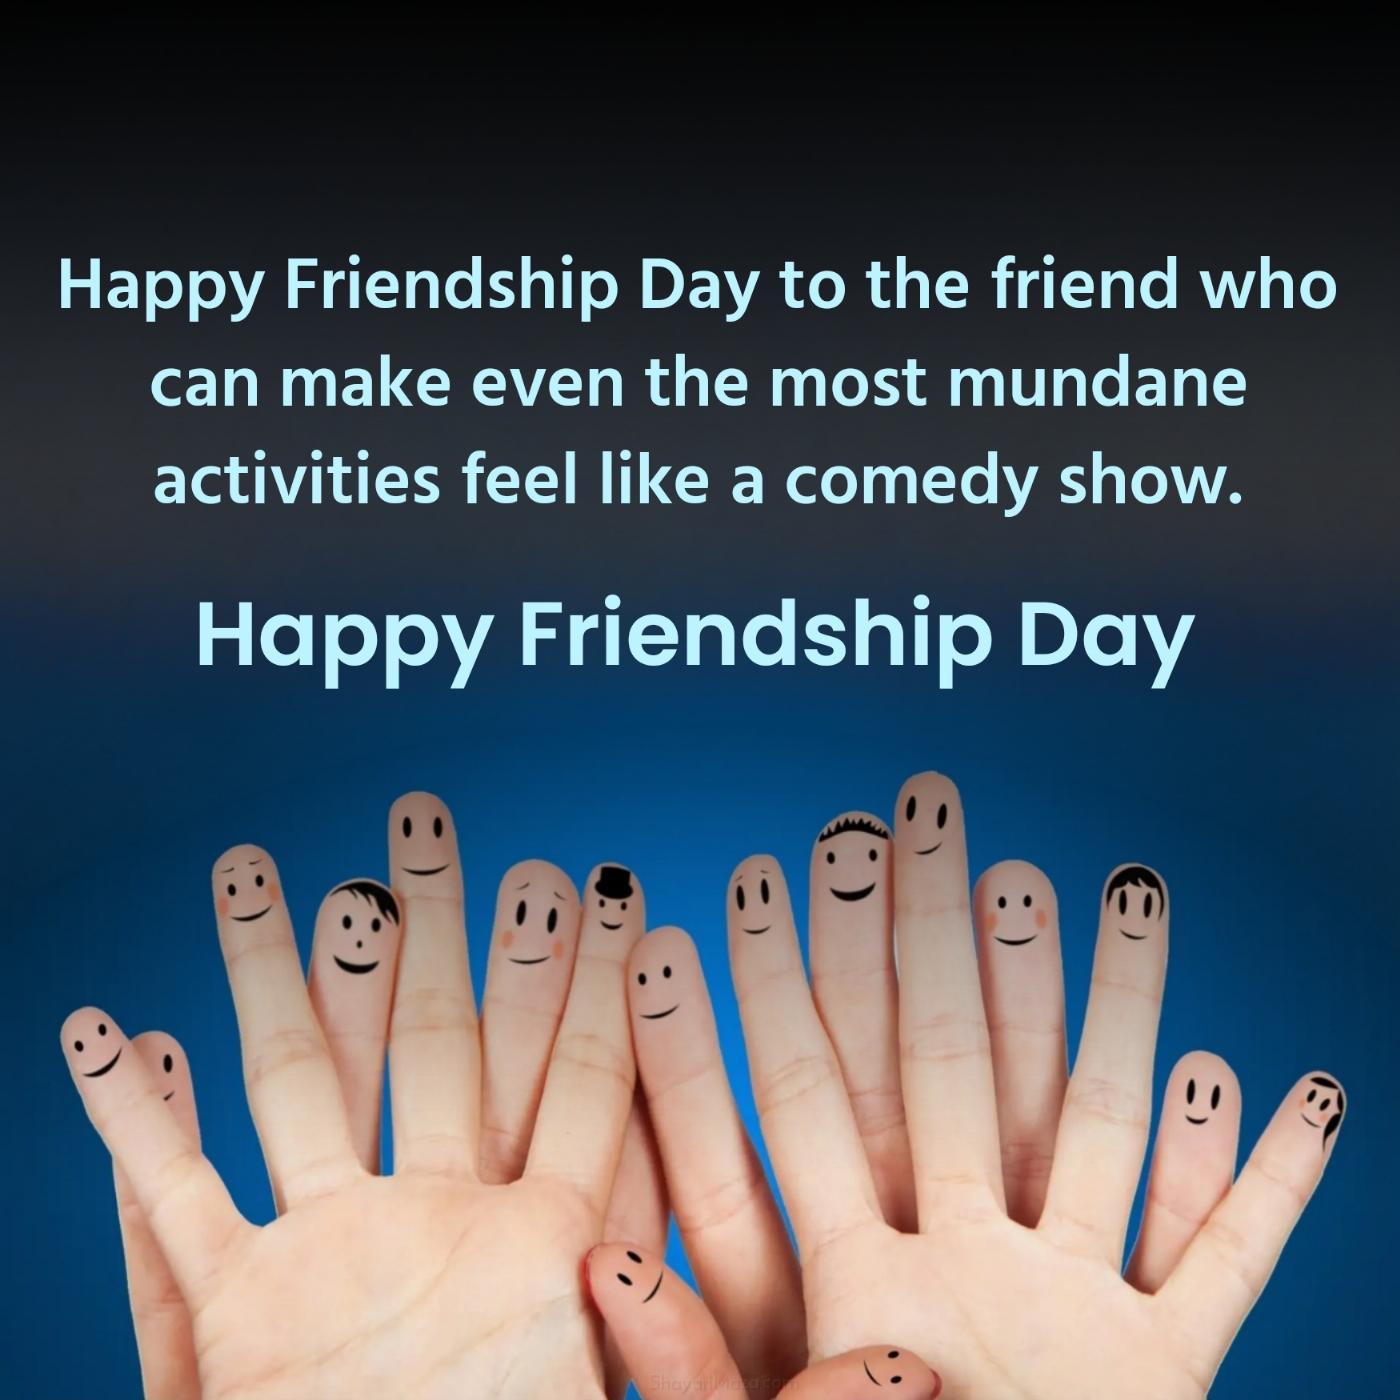 Happy Friendship Day to the friend who can make even the most mundane activities